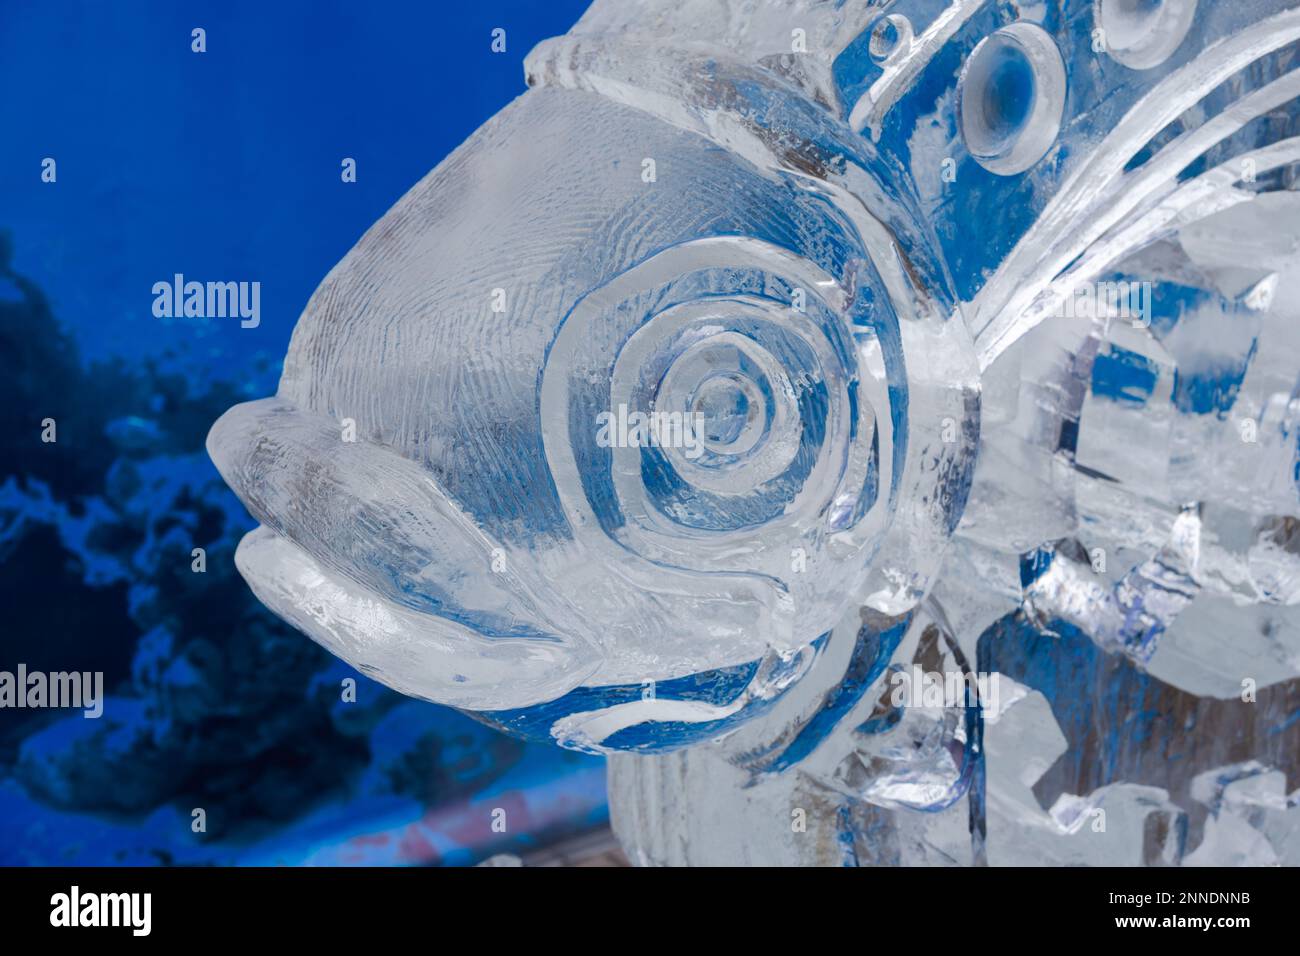 https://c8.alamy.com/comp/2NNDNNB/durham-uk-february-25th-2023-fire-and-ice-festival-in-durham-county-durham-uk-ice-carving-sculptures-on-display-around-the-city-at-the-annual-winter-event-that-brings-together-ice-sculptors-and-visitors-who-follow-a-city-trail-and-watch-live-demonstrations-of-the-art-form-as-well-as-later-fire-performances-this-year-the-theme-of-the-event-was-steampunk-credit-hazel-plateralamy-live-news-2NNDNNB.jpg